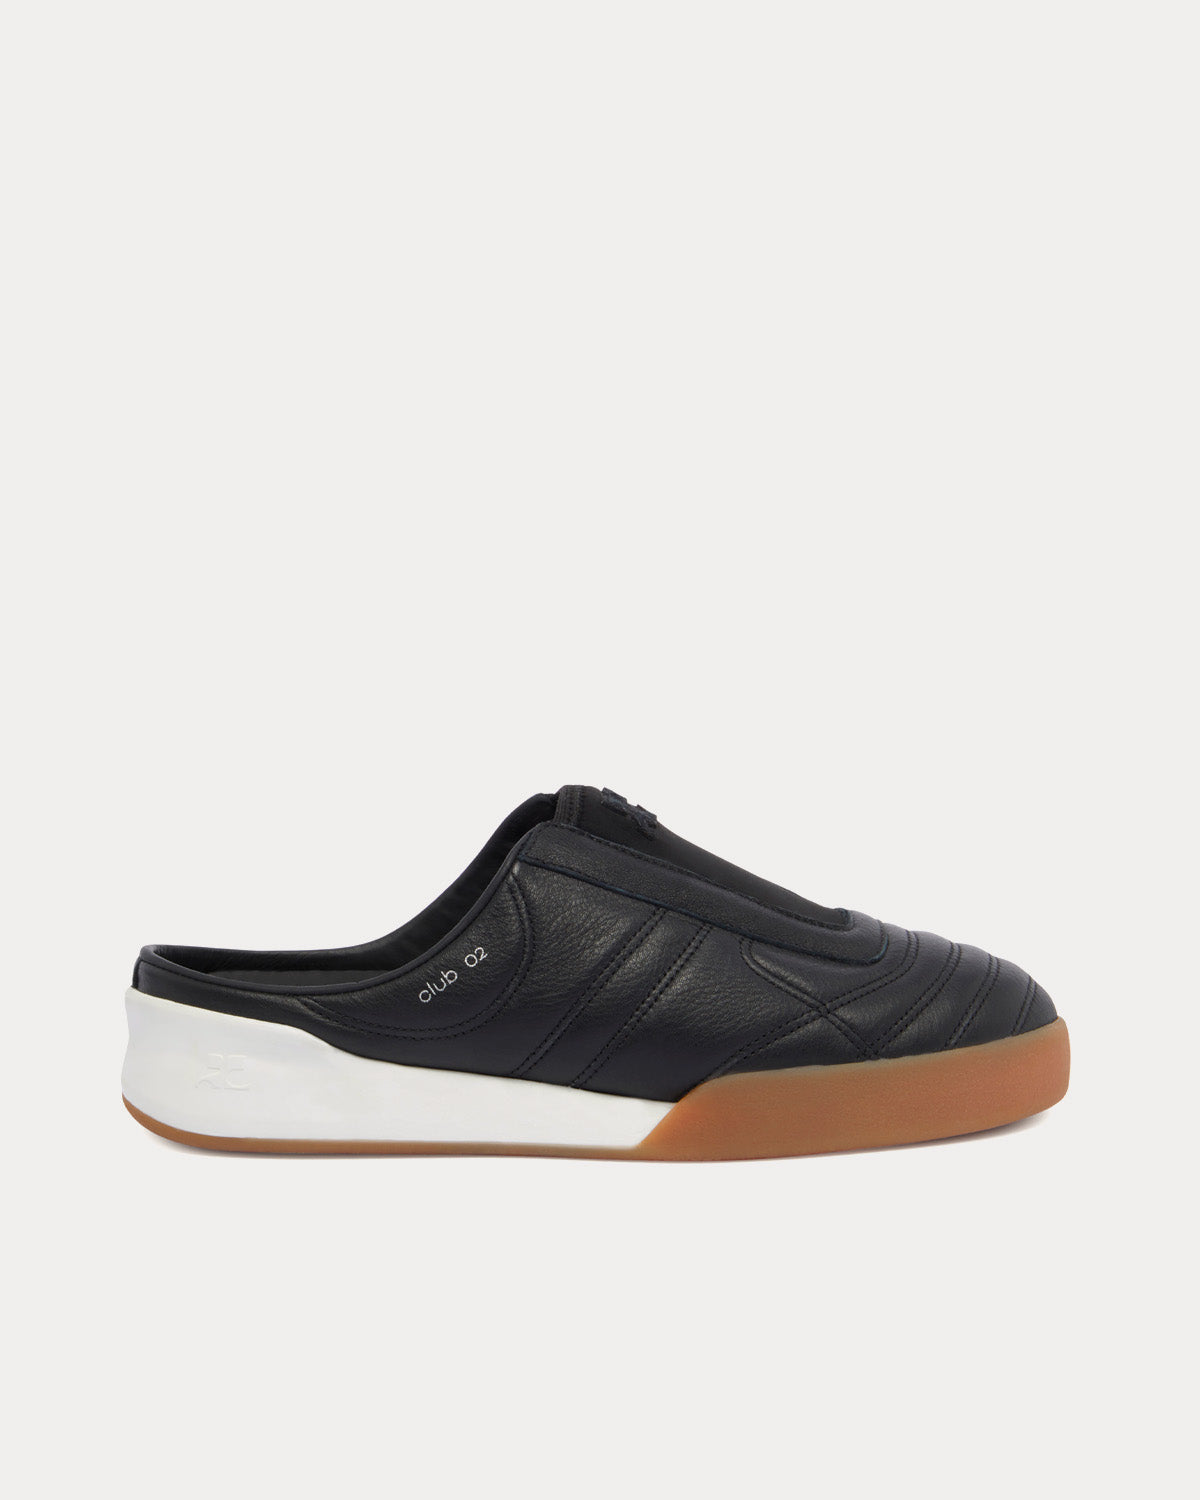 Courrèges - Mules Club 02 Leather Black Slip On Sneakers